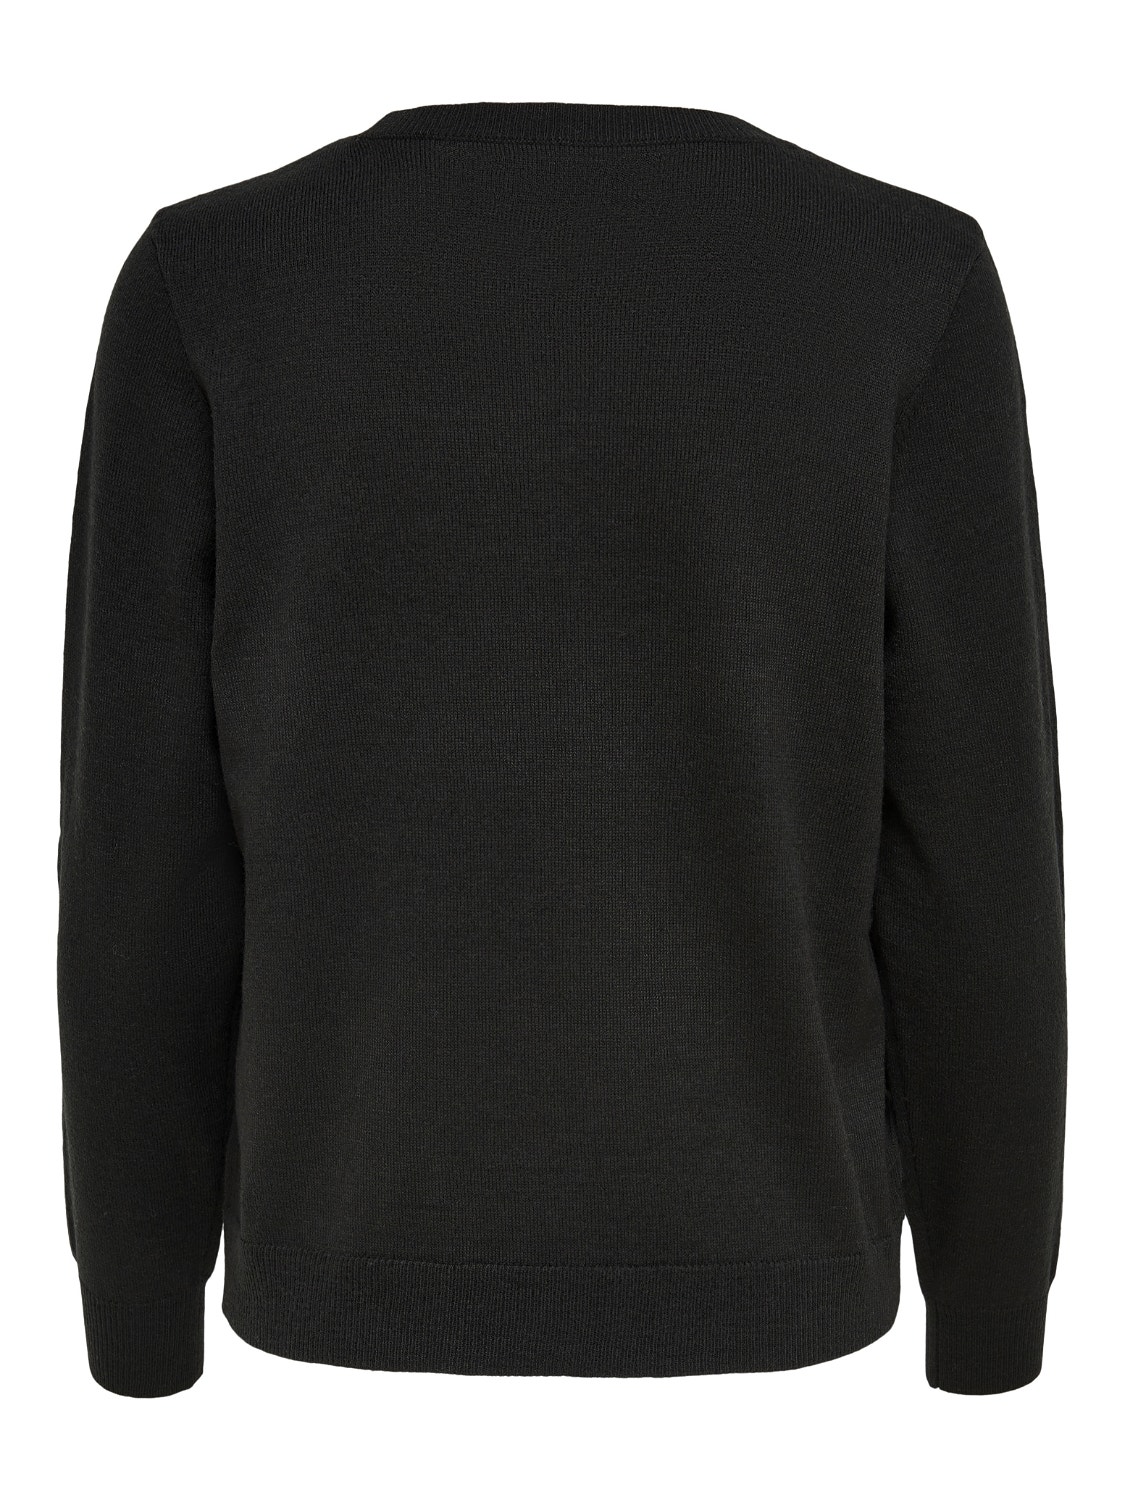 ONLY Weihnachts- Pullover -Black - 15220363